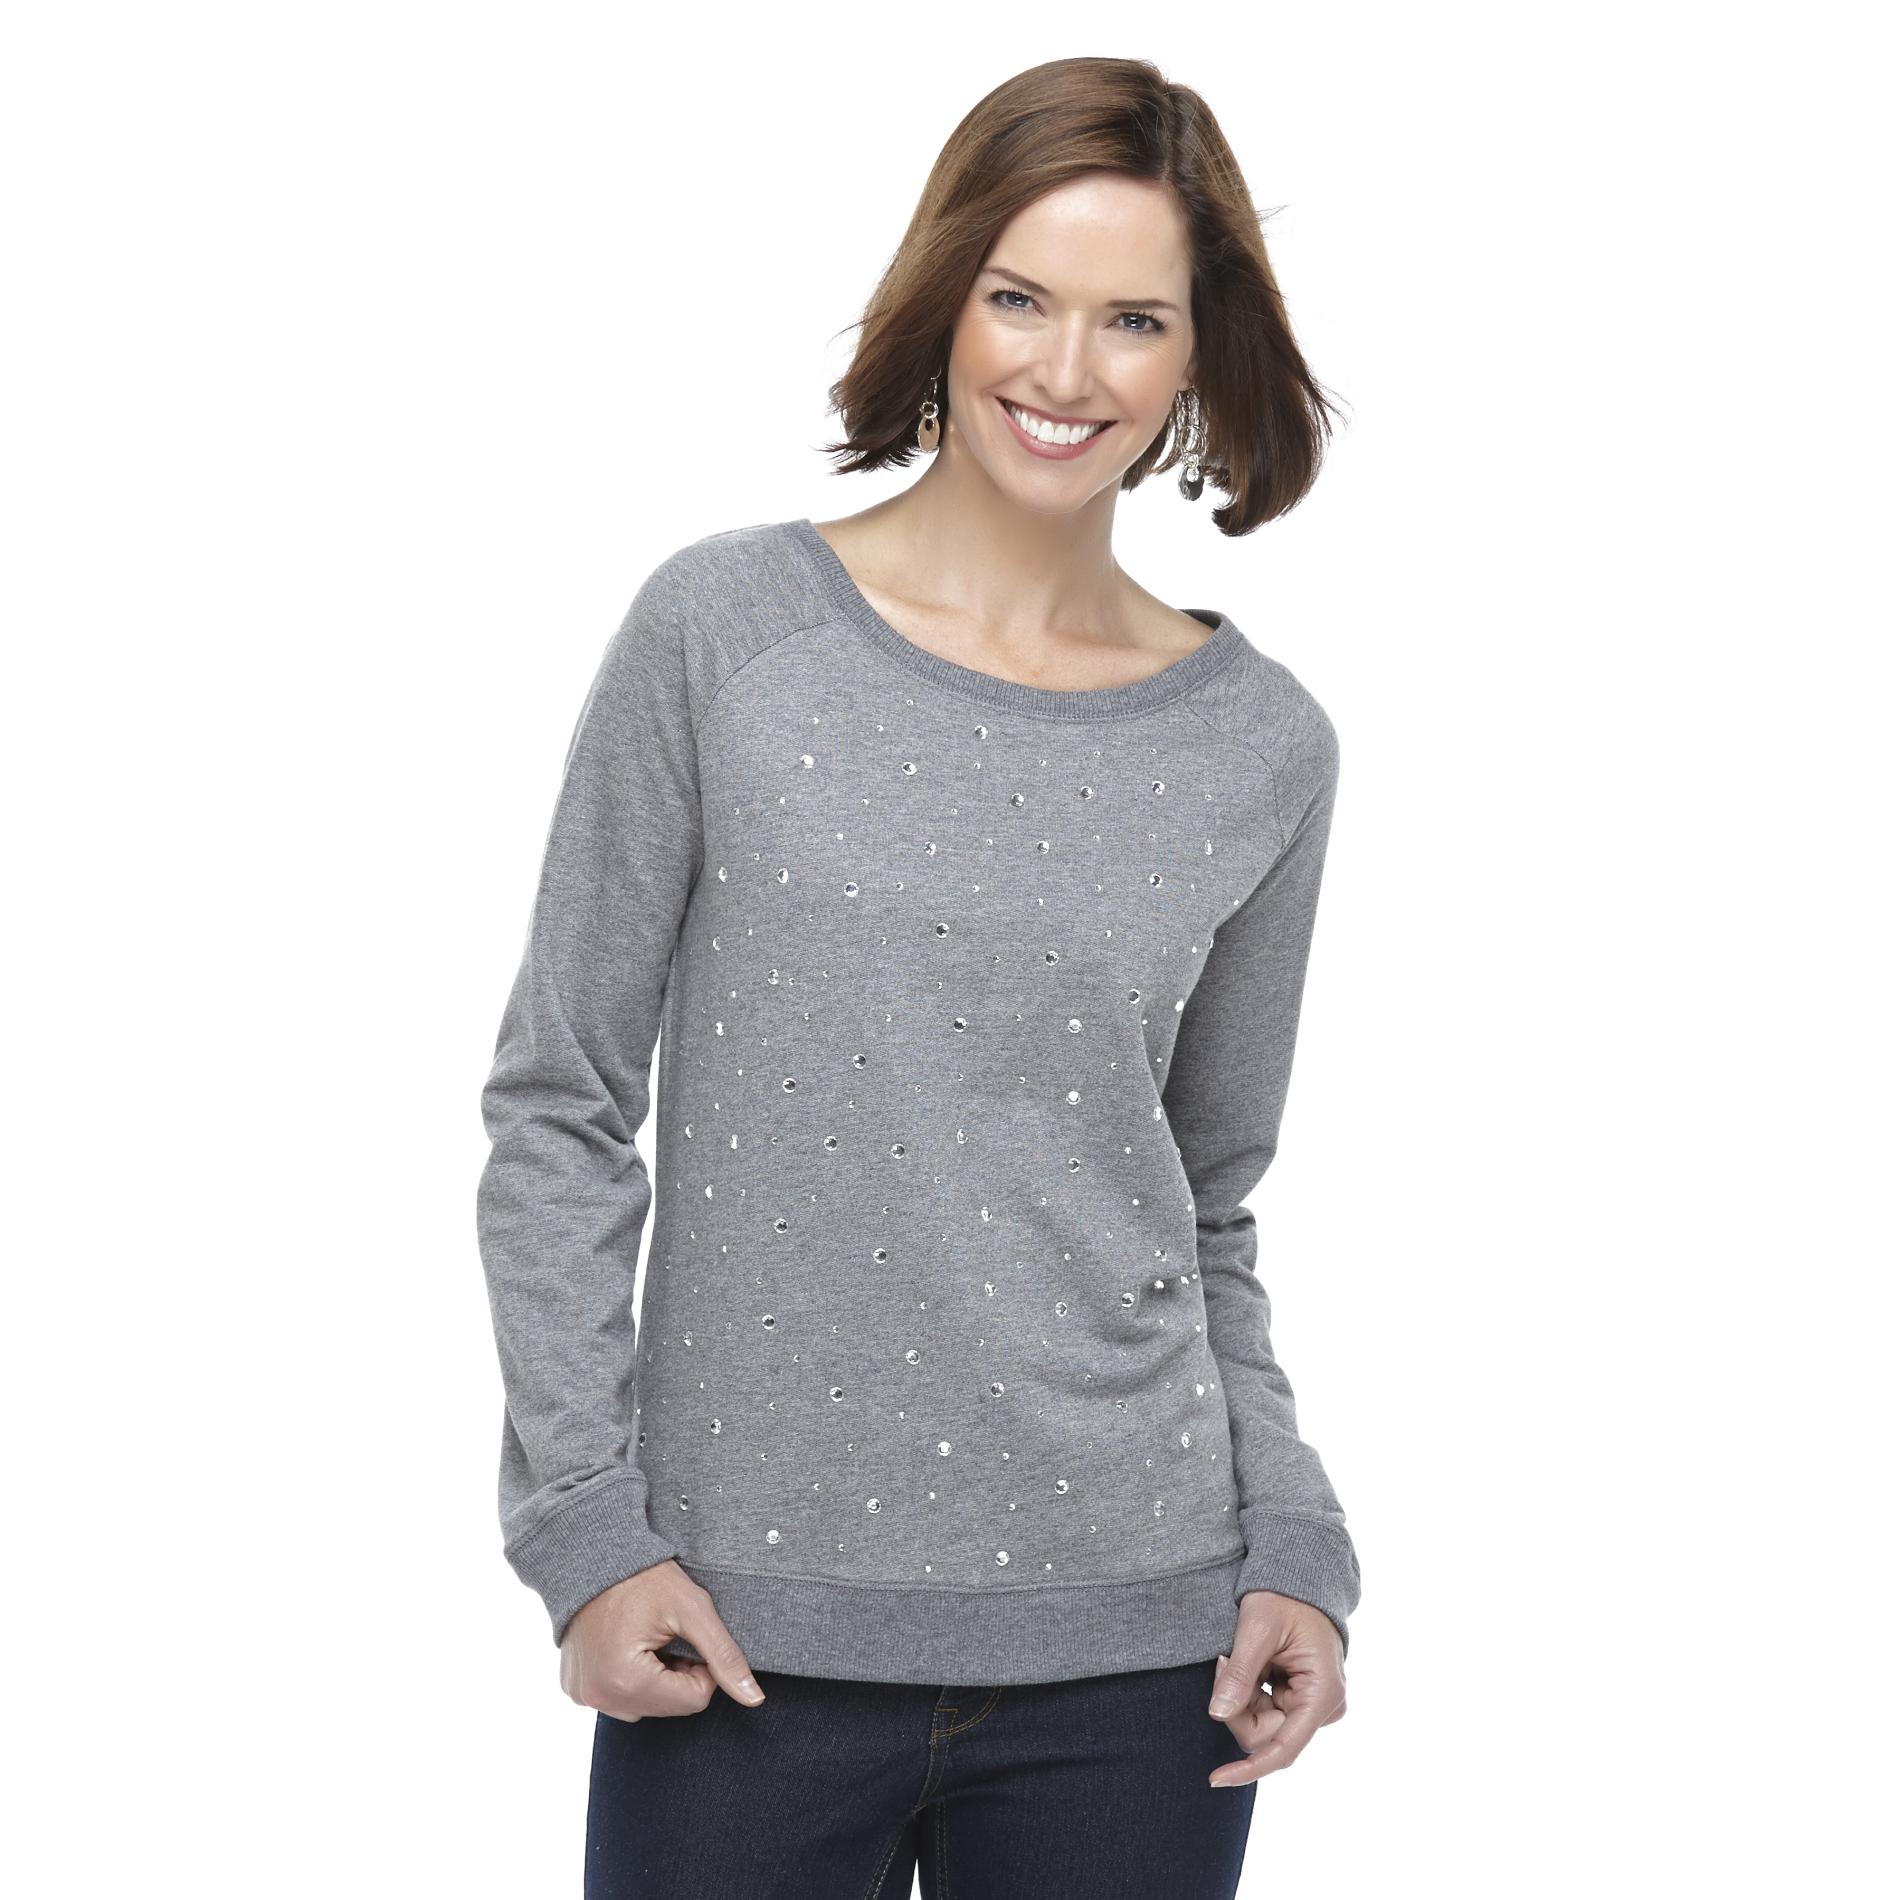 Jaclyn Smith Women's Embellished French Terry Knit Top - Rhinestones